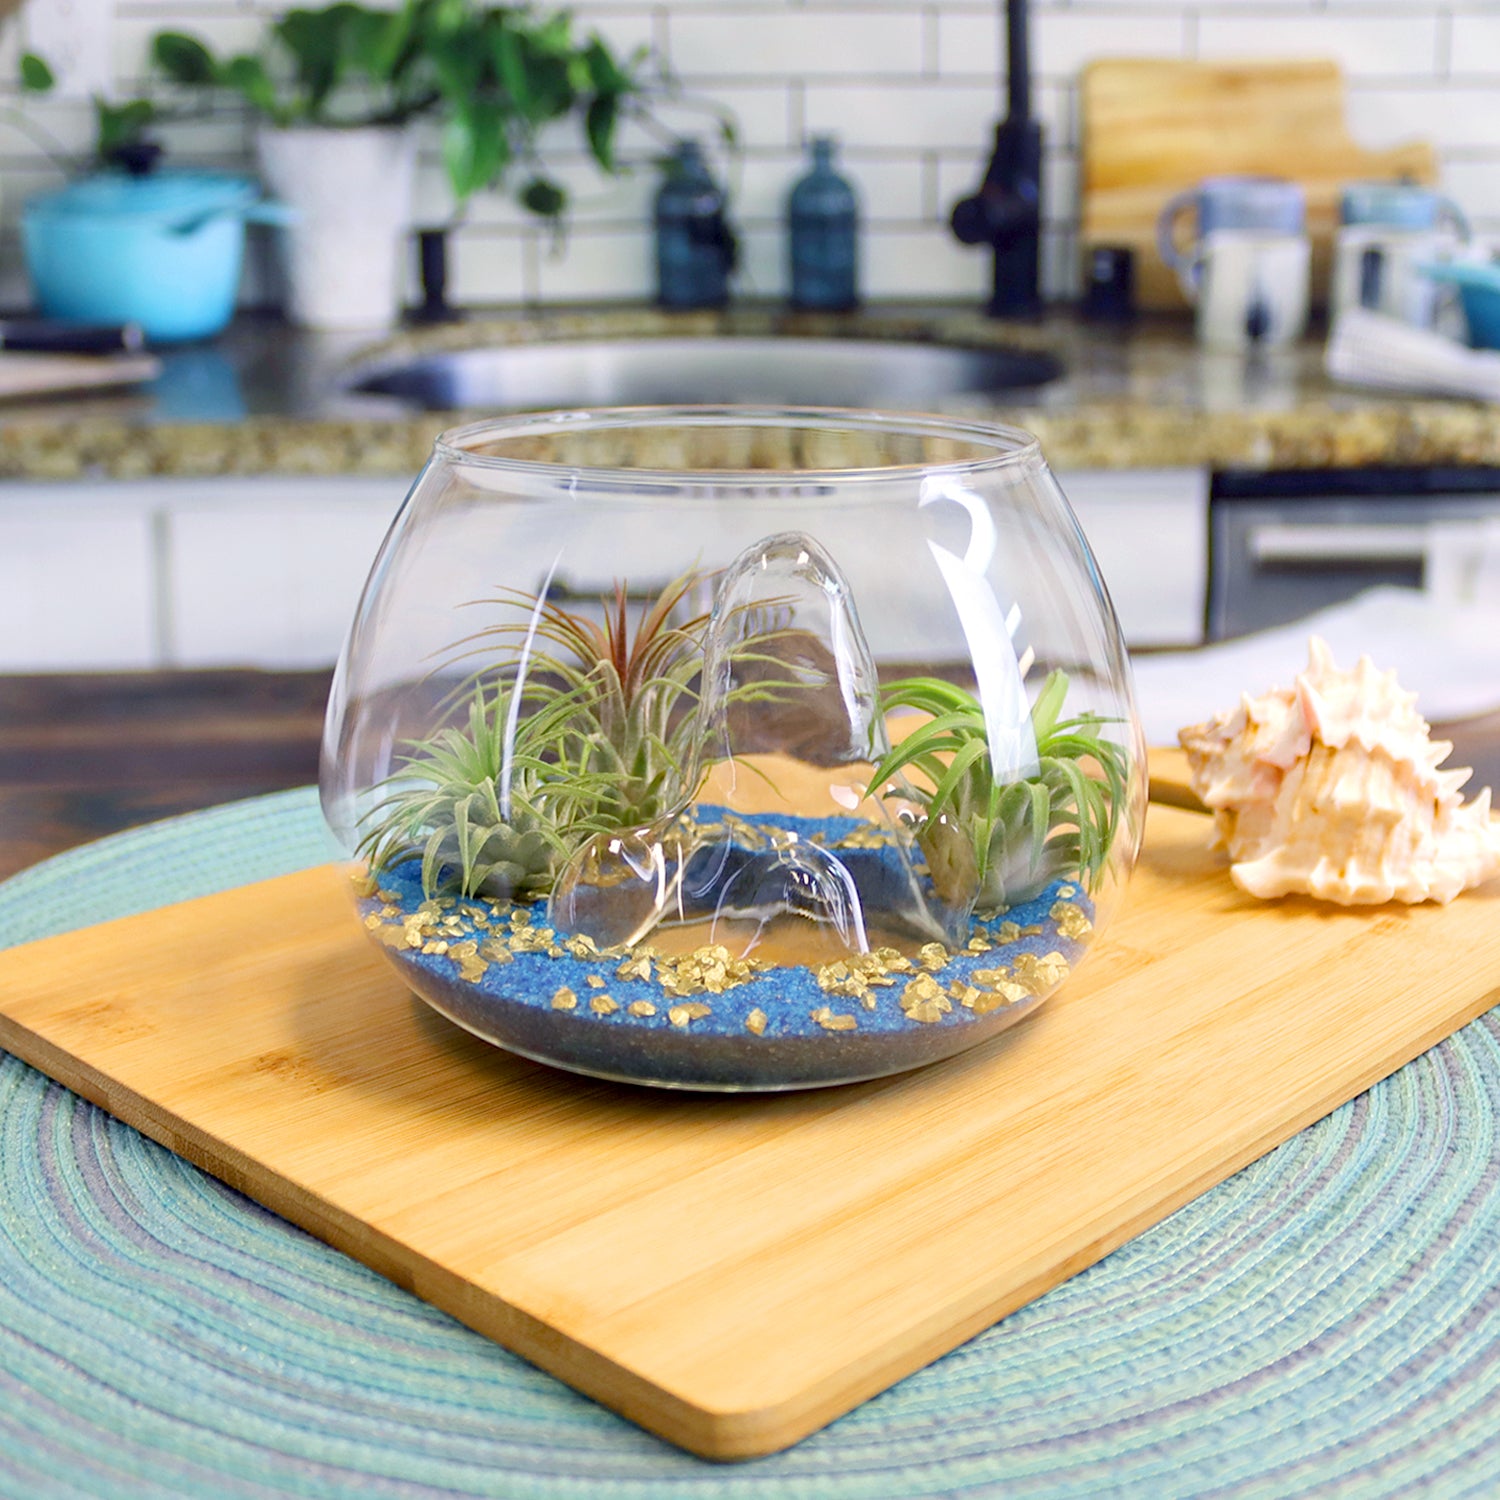 NW Wholesaler 4 inch Glass Orb Terrarium Kit with Blue Sand and 3 Live Air  Plants 